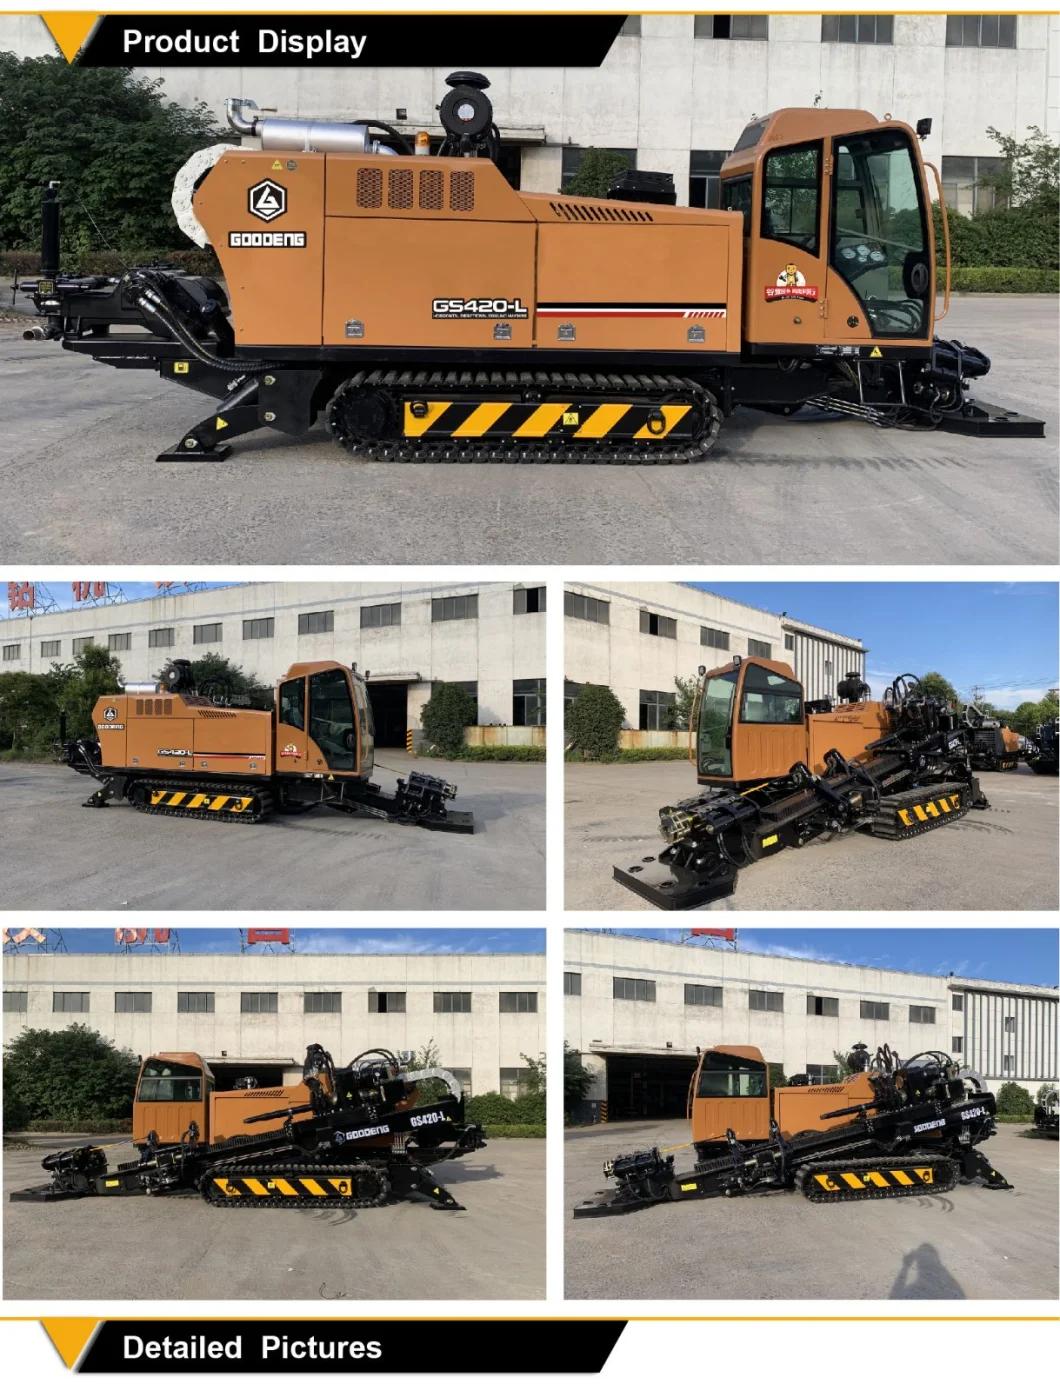 Goodeng GS420-LS HDD rig trenchless machine